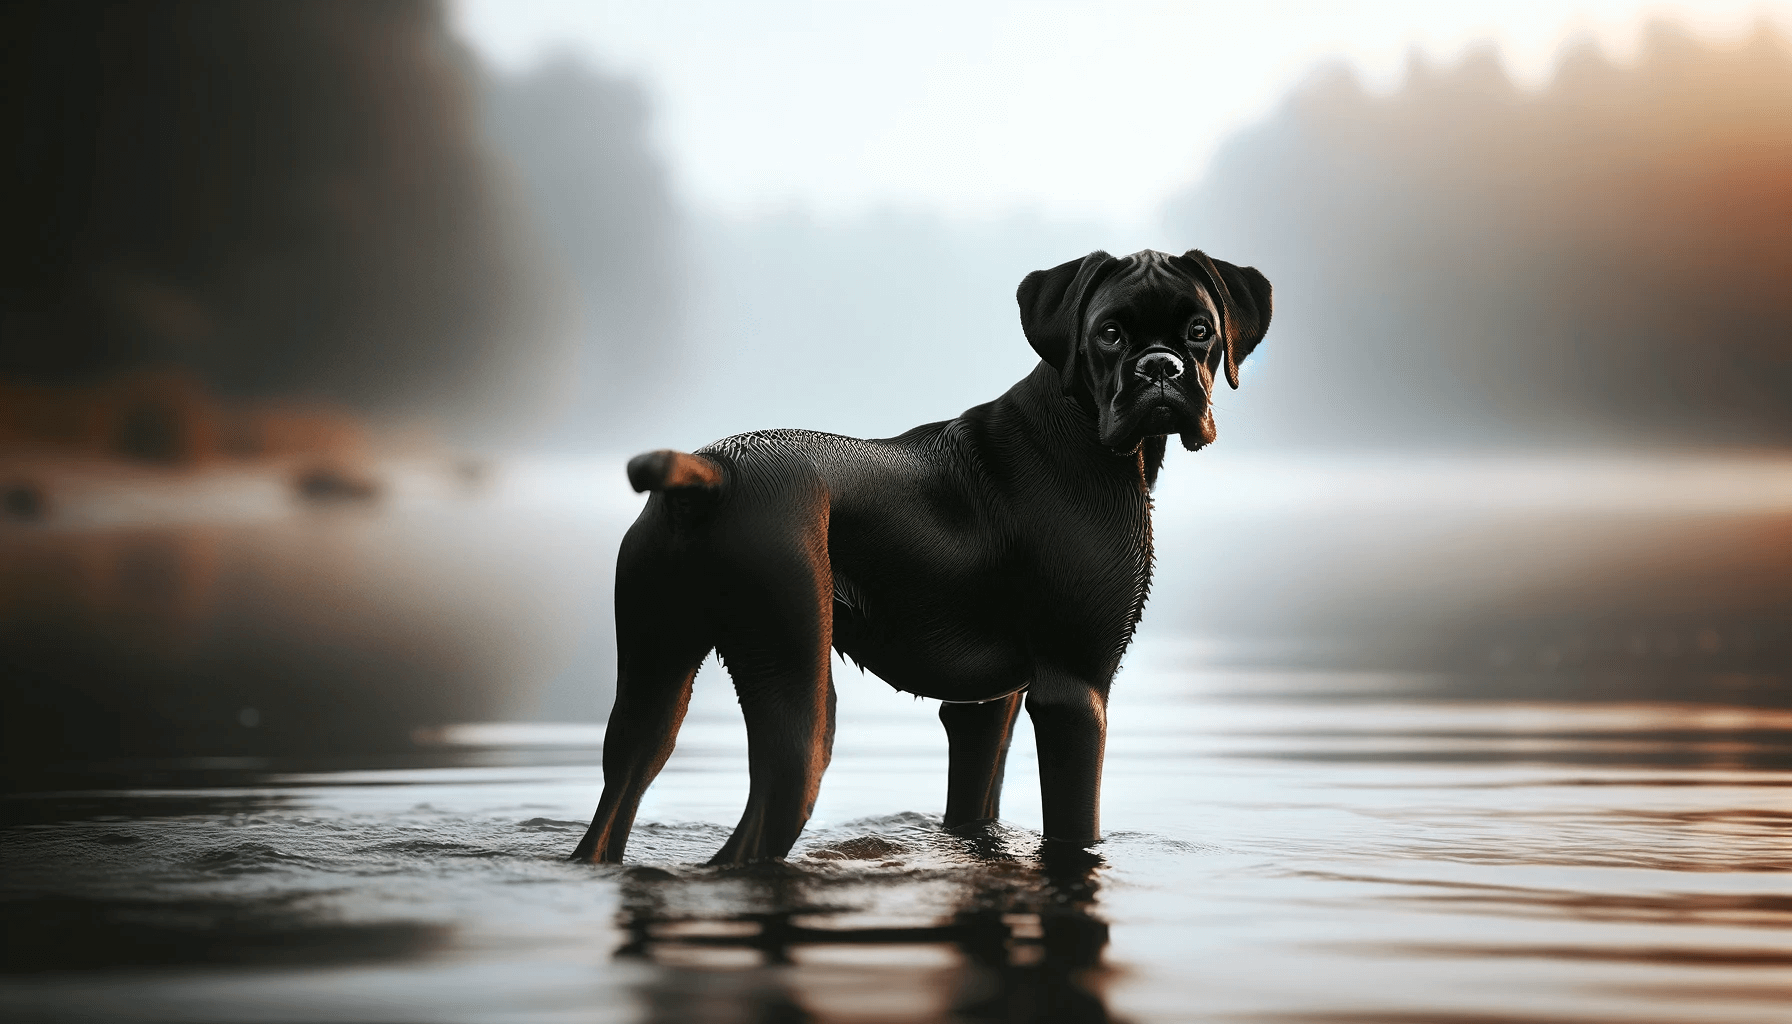 Elegant Black Boxador (Boxer Lab Mix) standing in shallow water, looking back with a composed and attentive expression.